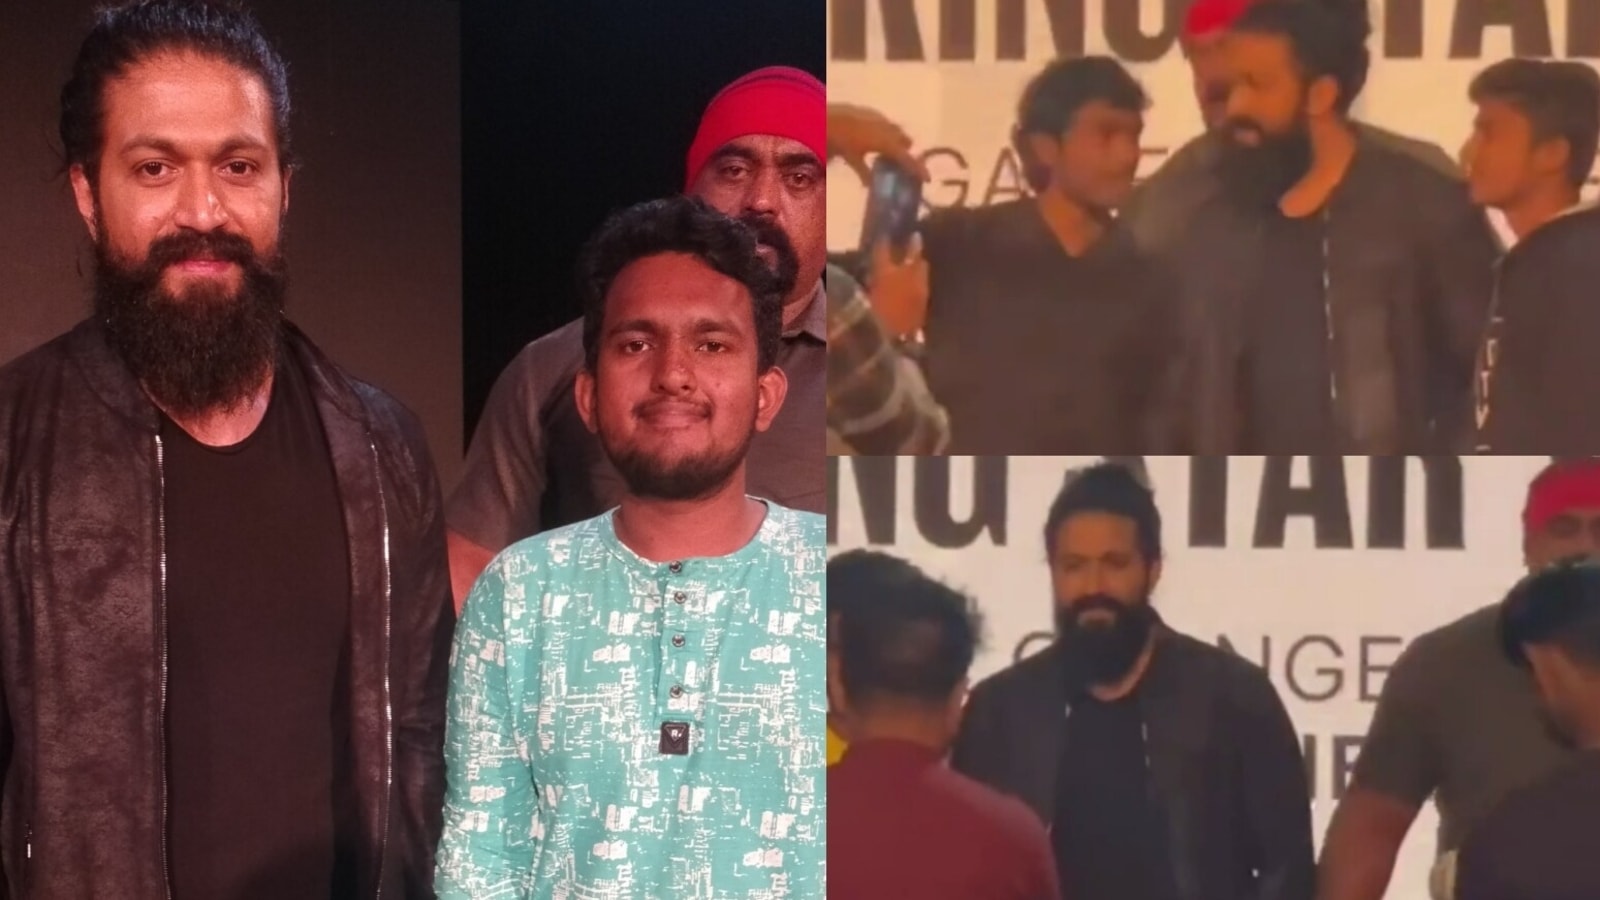 Twitter hails KGF star Yash as he patiently poses with hundreds of fans for pics at event: ‘Real superstar’